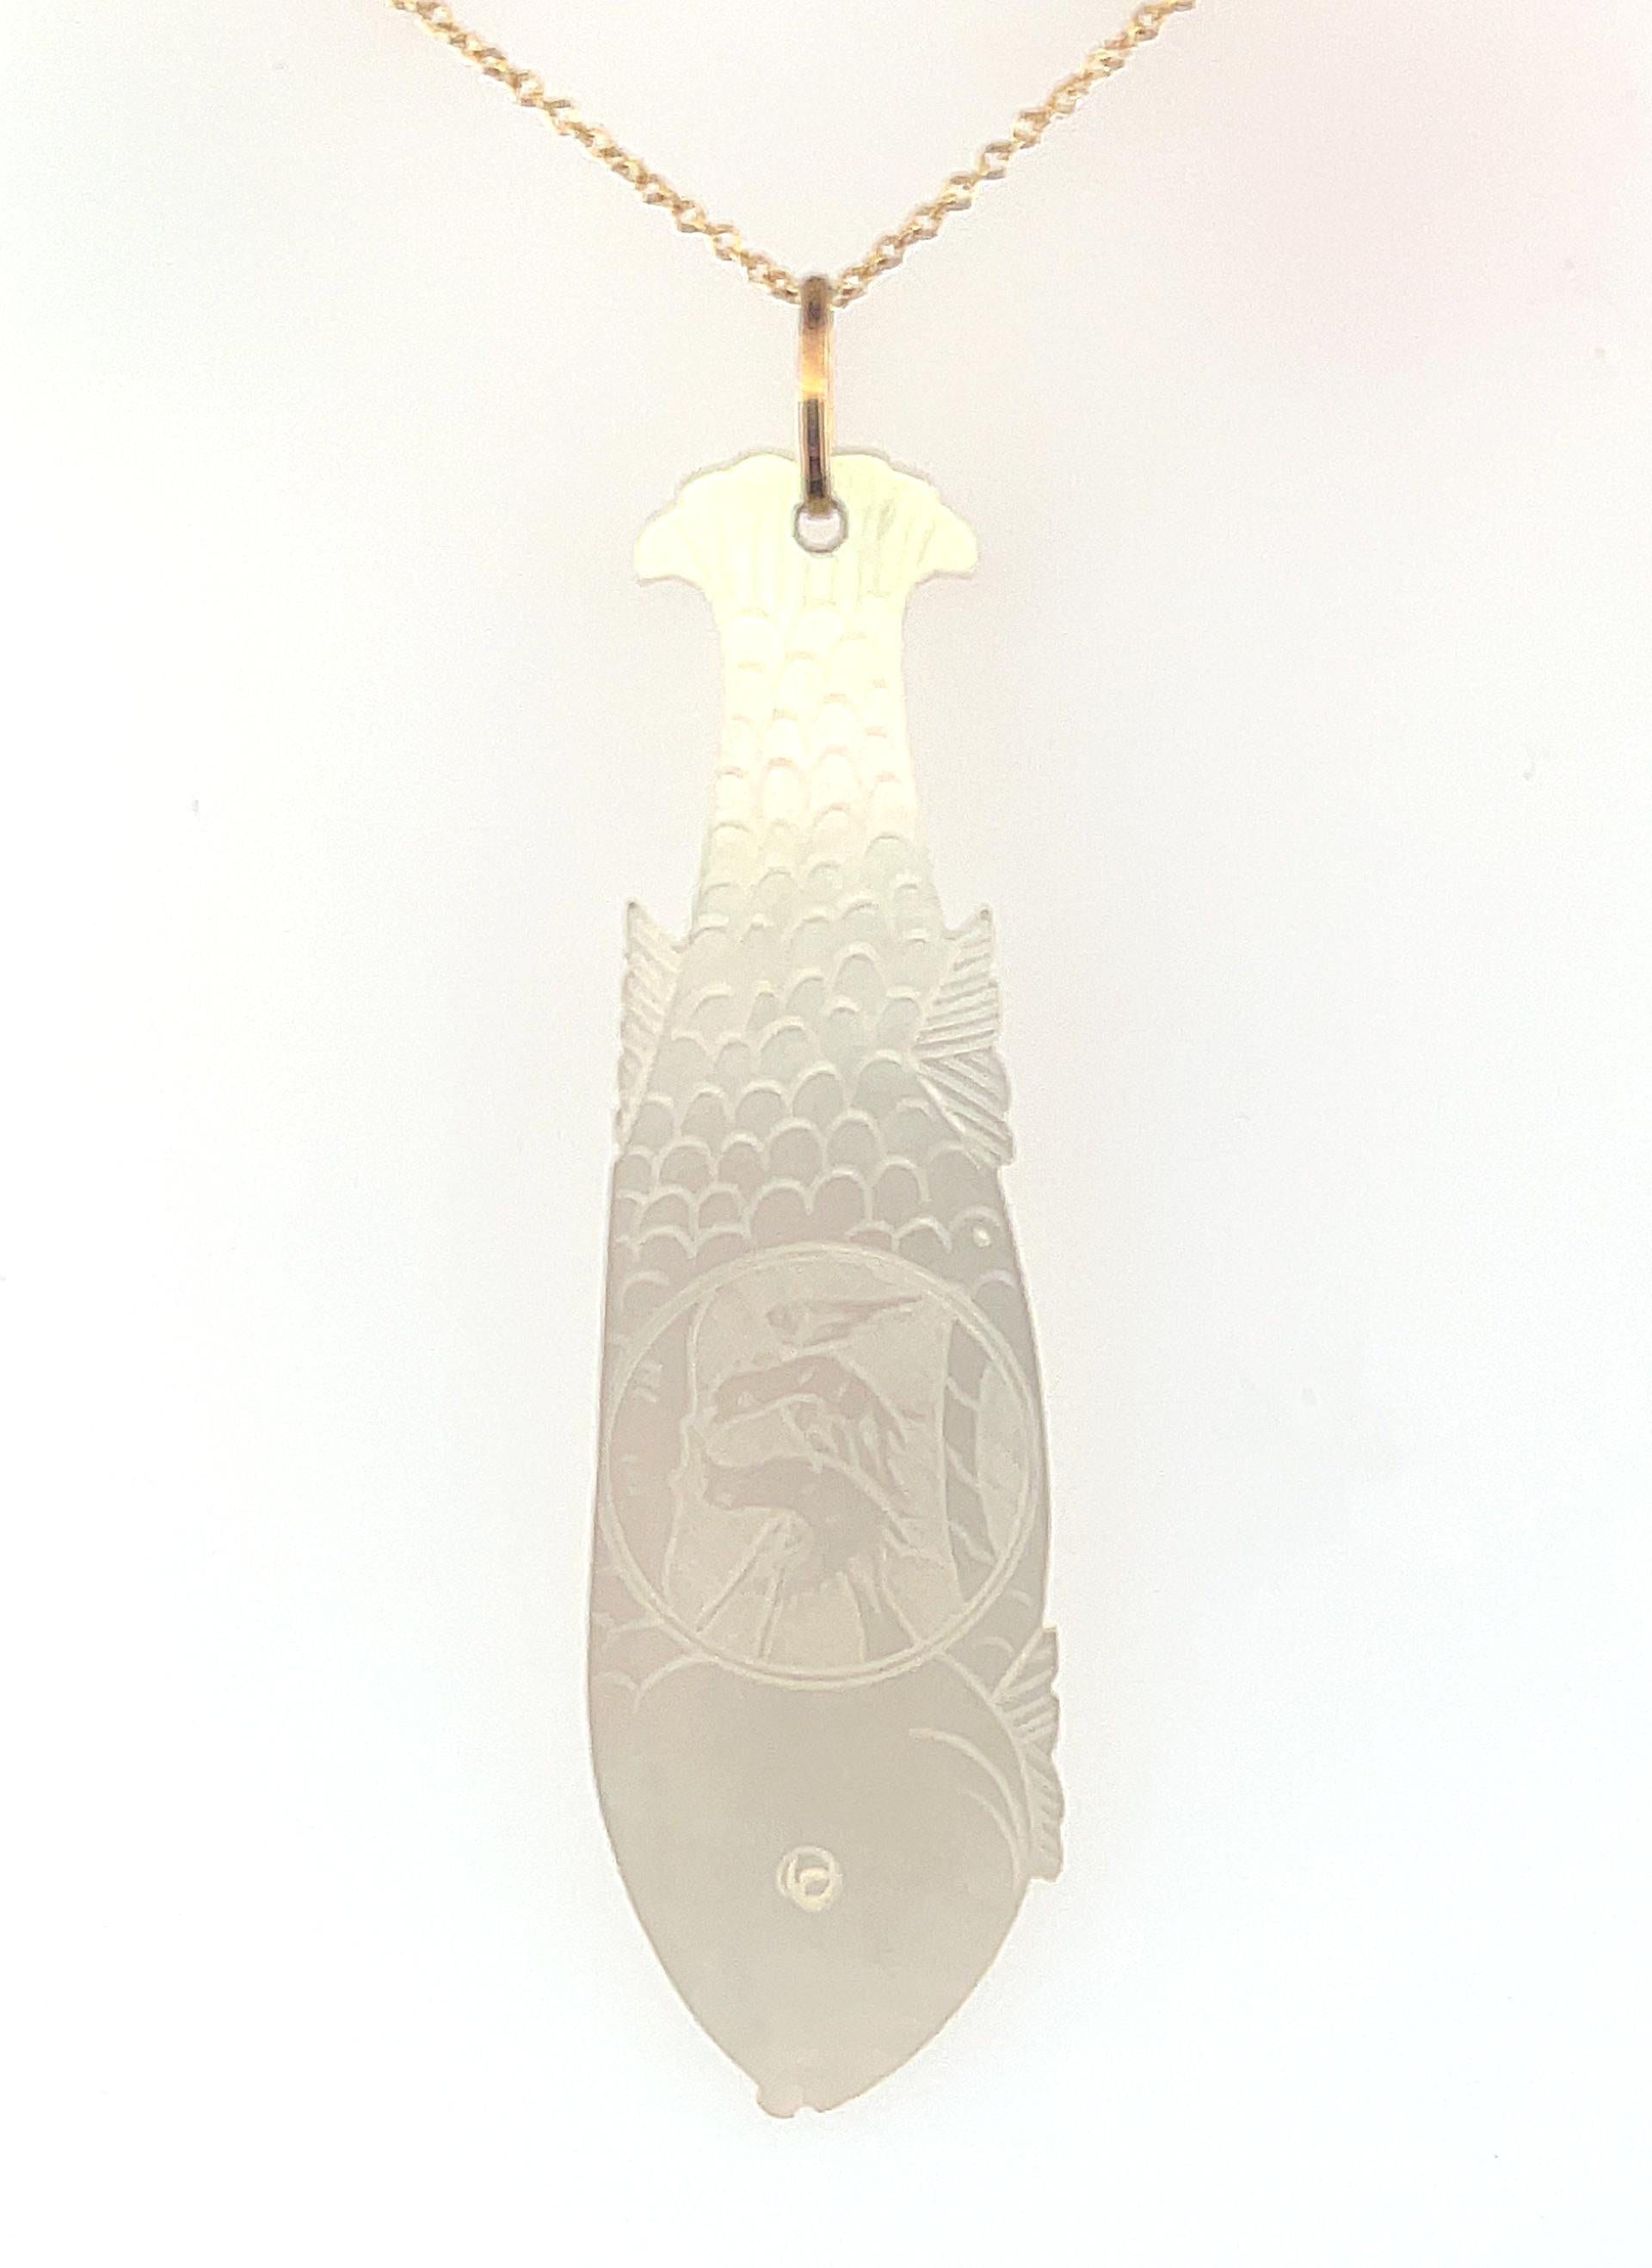 This unusual pendant features an antique, mother-of-pearl gambling counter in the shape of a fish. Originally carved in China for export to Britain, gaming counters or 